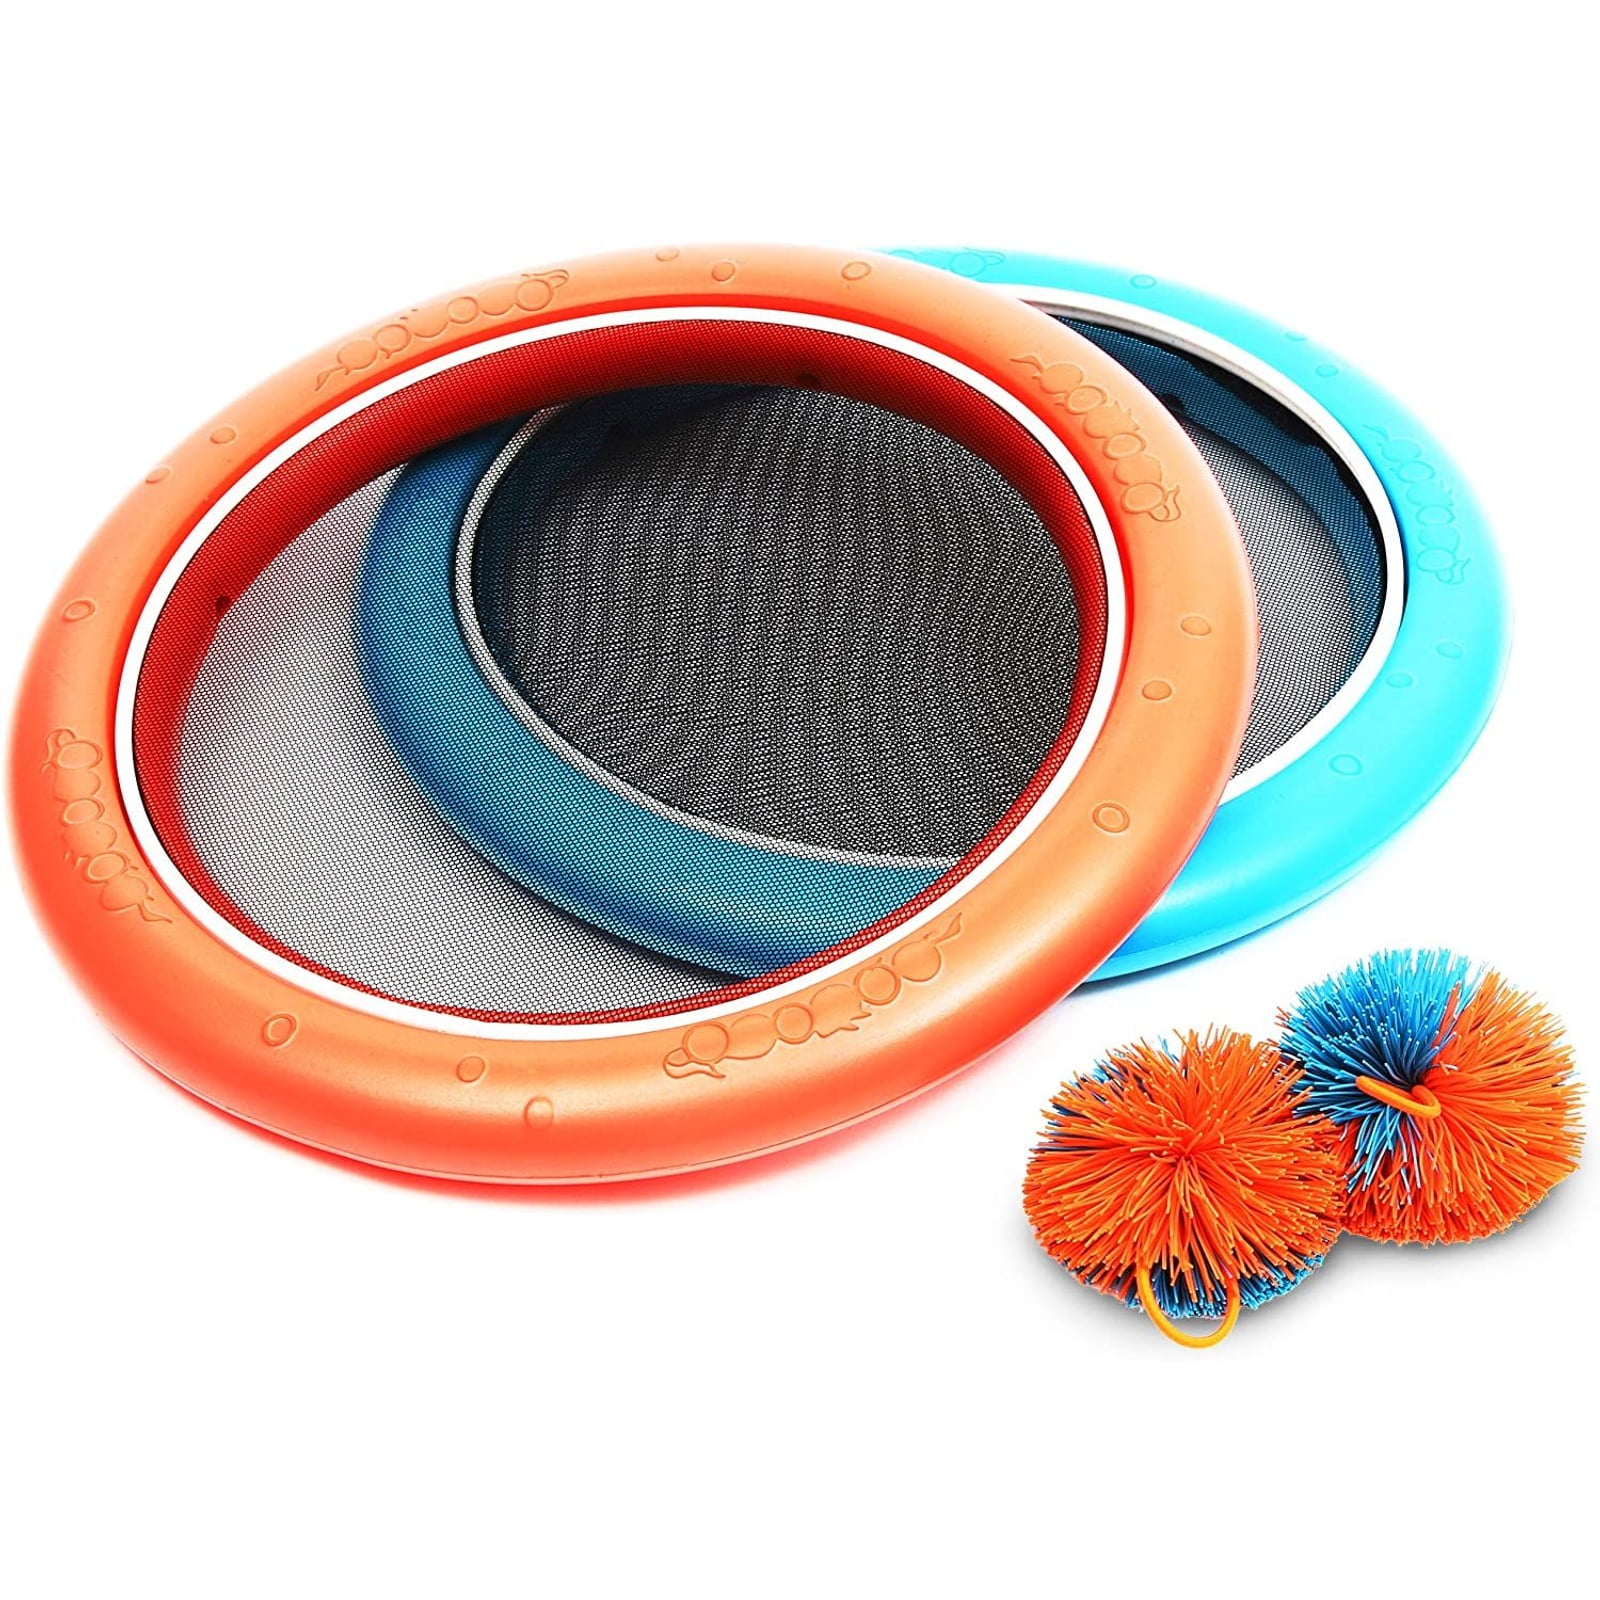 VORCOOL Mezo disc set Bounce Game with Rubberband Bouncy Ball for Kids Adults 2Pcs Racket and 1Pcs Ball